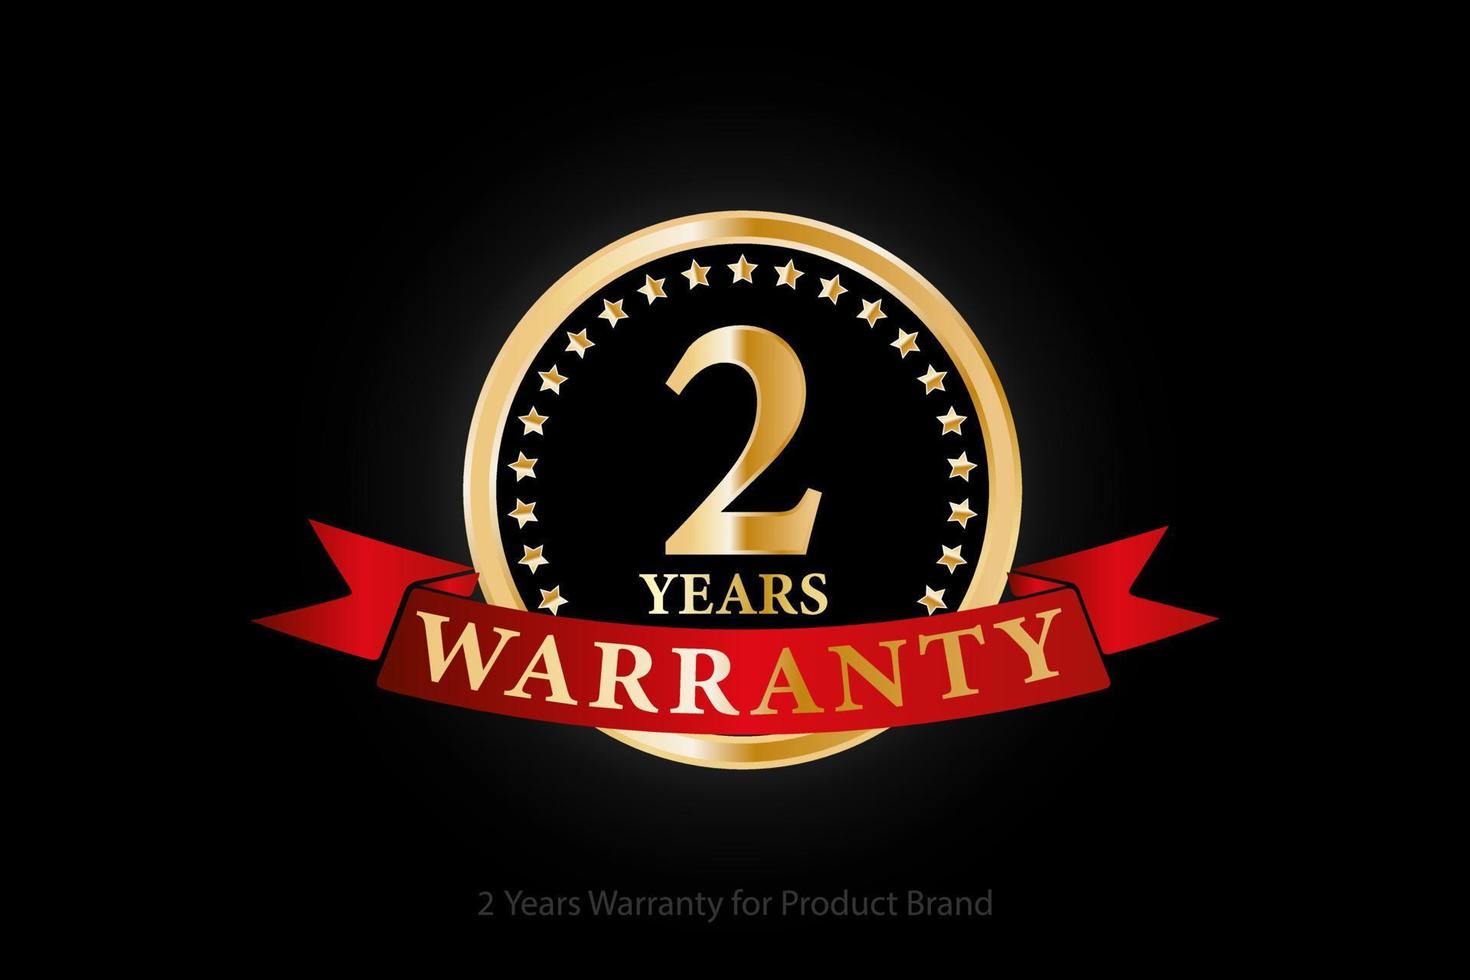 2 years golden warranty logo with ring and red ribbon isolated on black background, vector design for product warranty, guarantee, service, corporate, and your business.